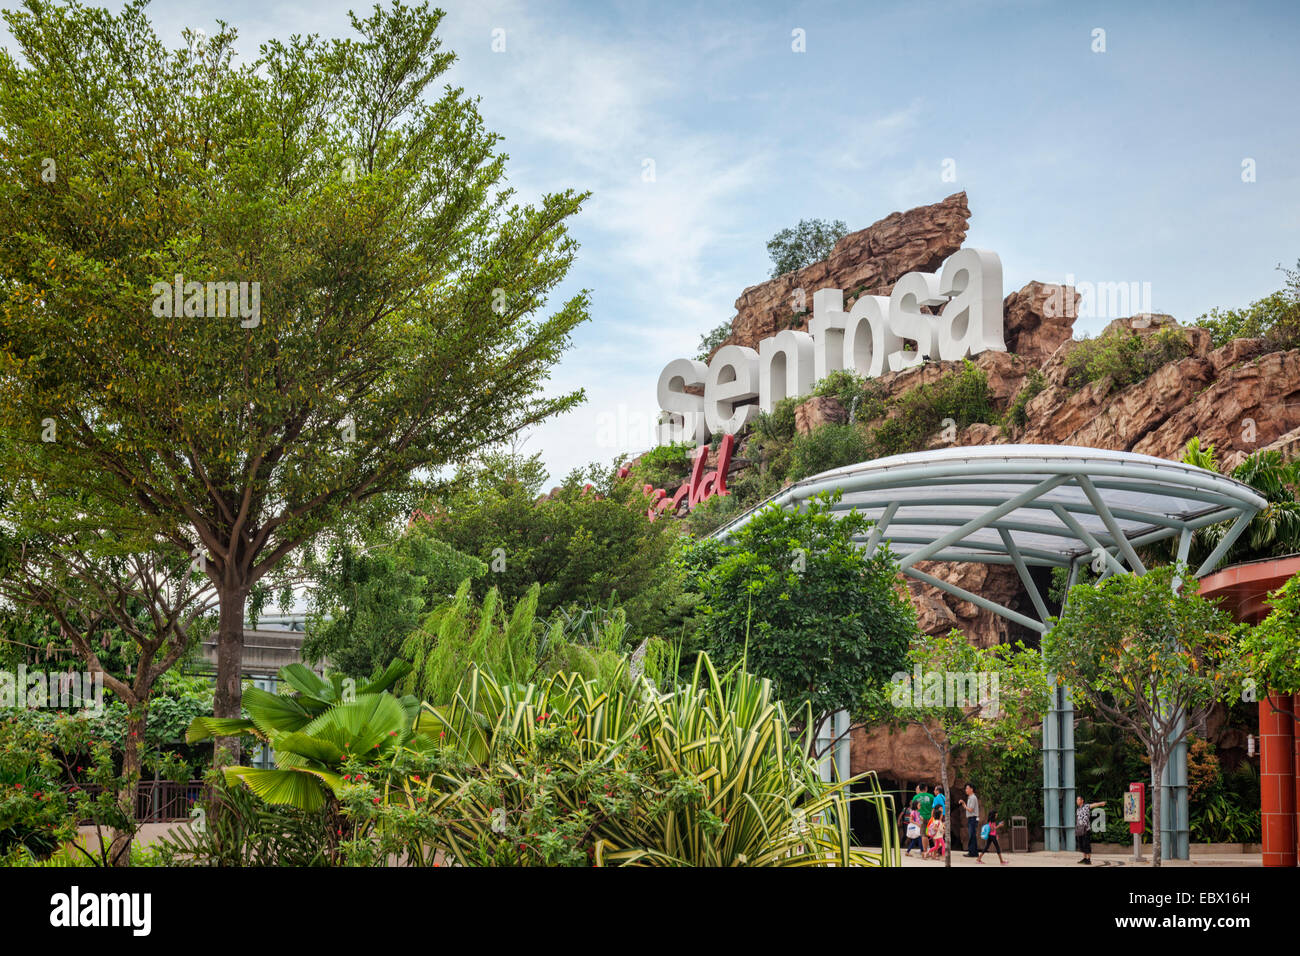 Sign at the entrance to Sentosa Island, a resort and entertainment area reached by a causeway from Singapore. Stock Photo